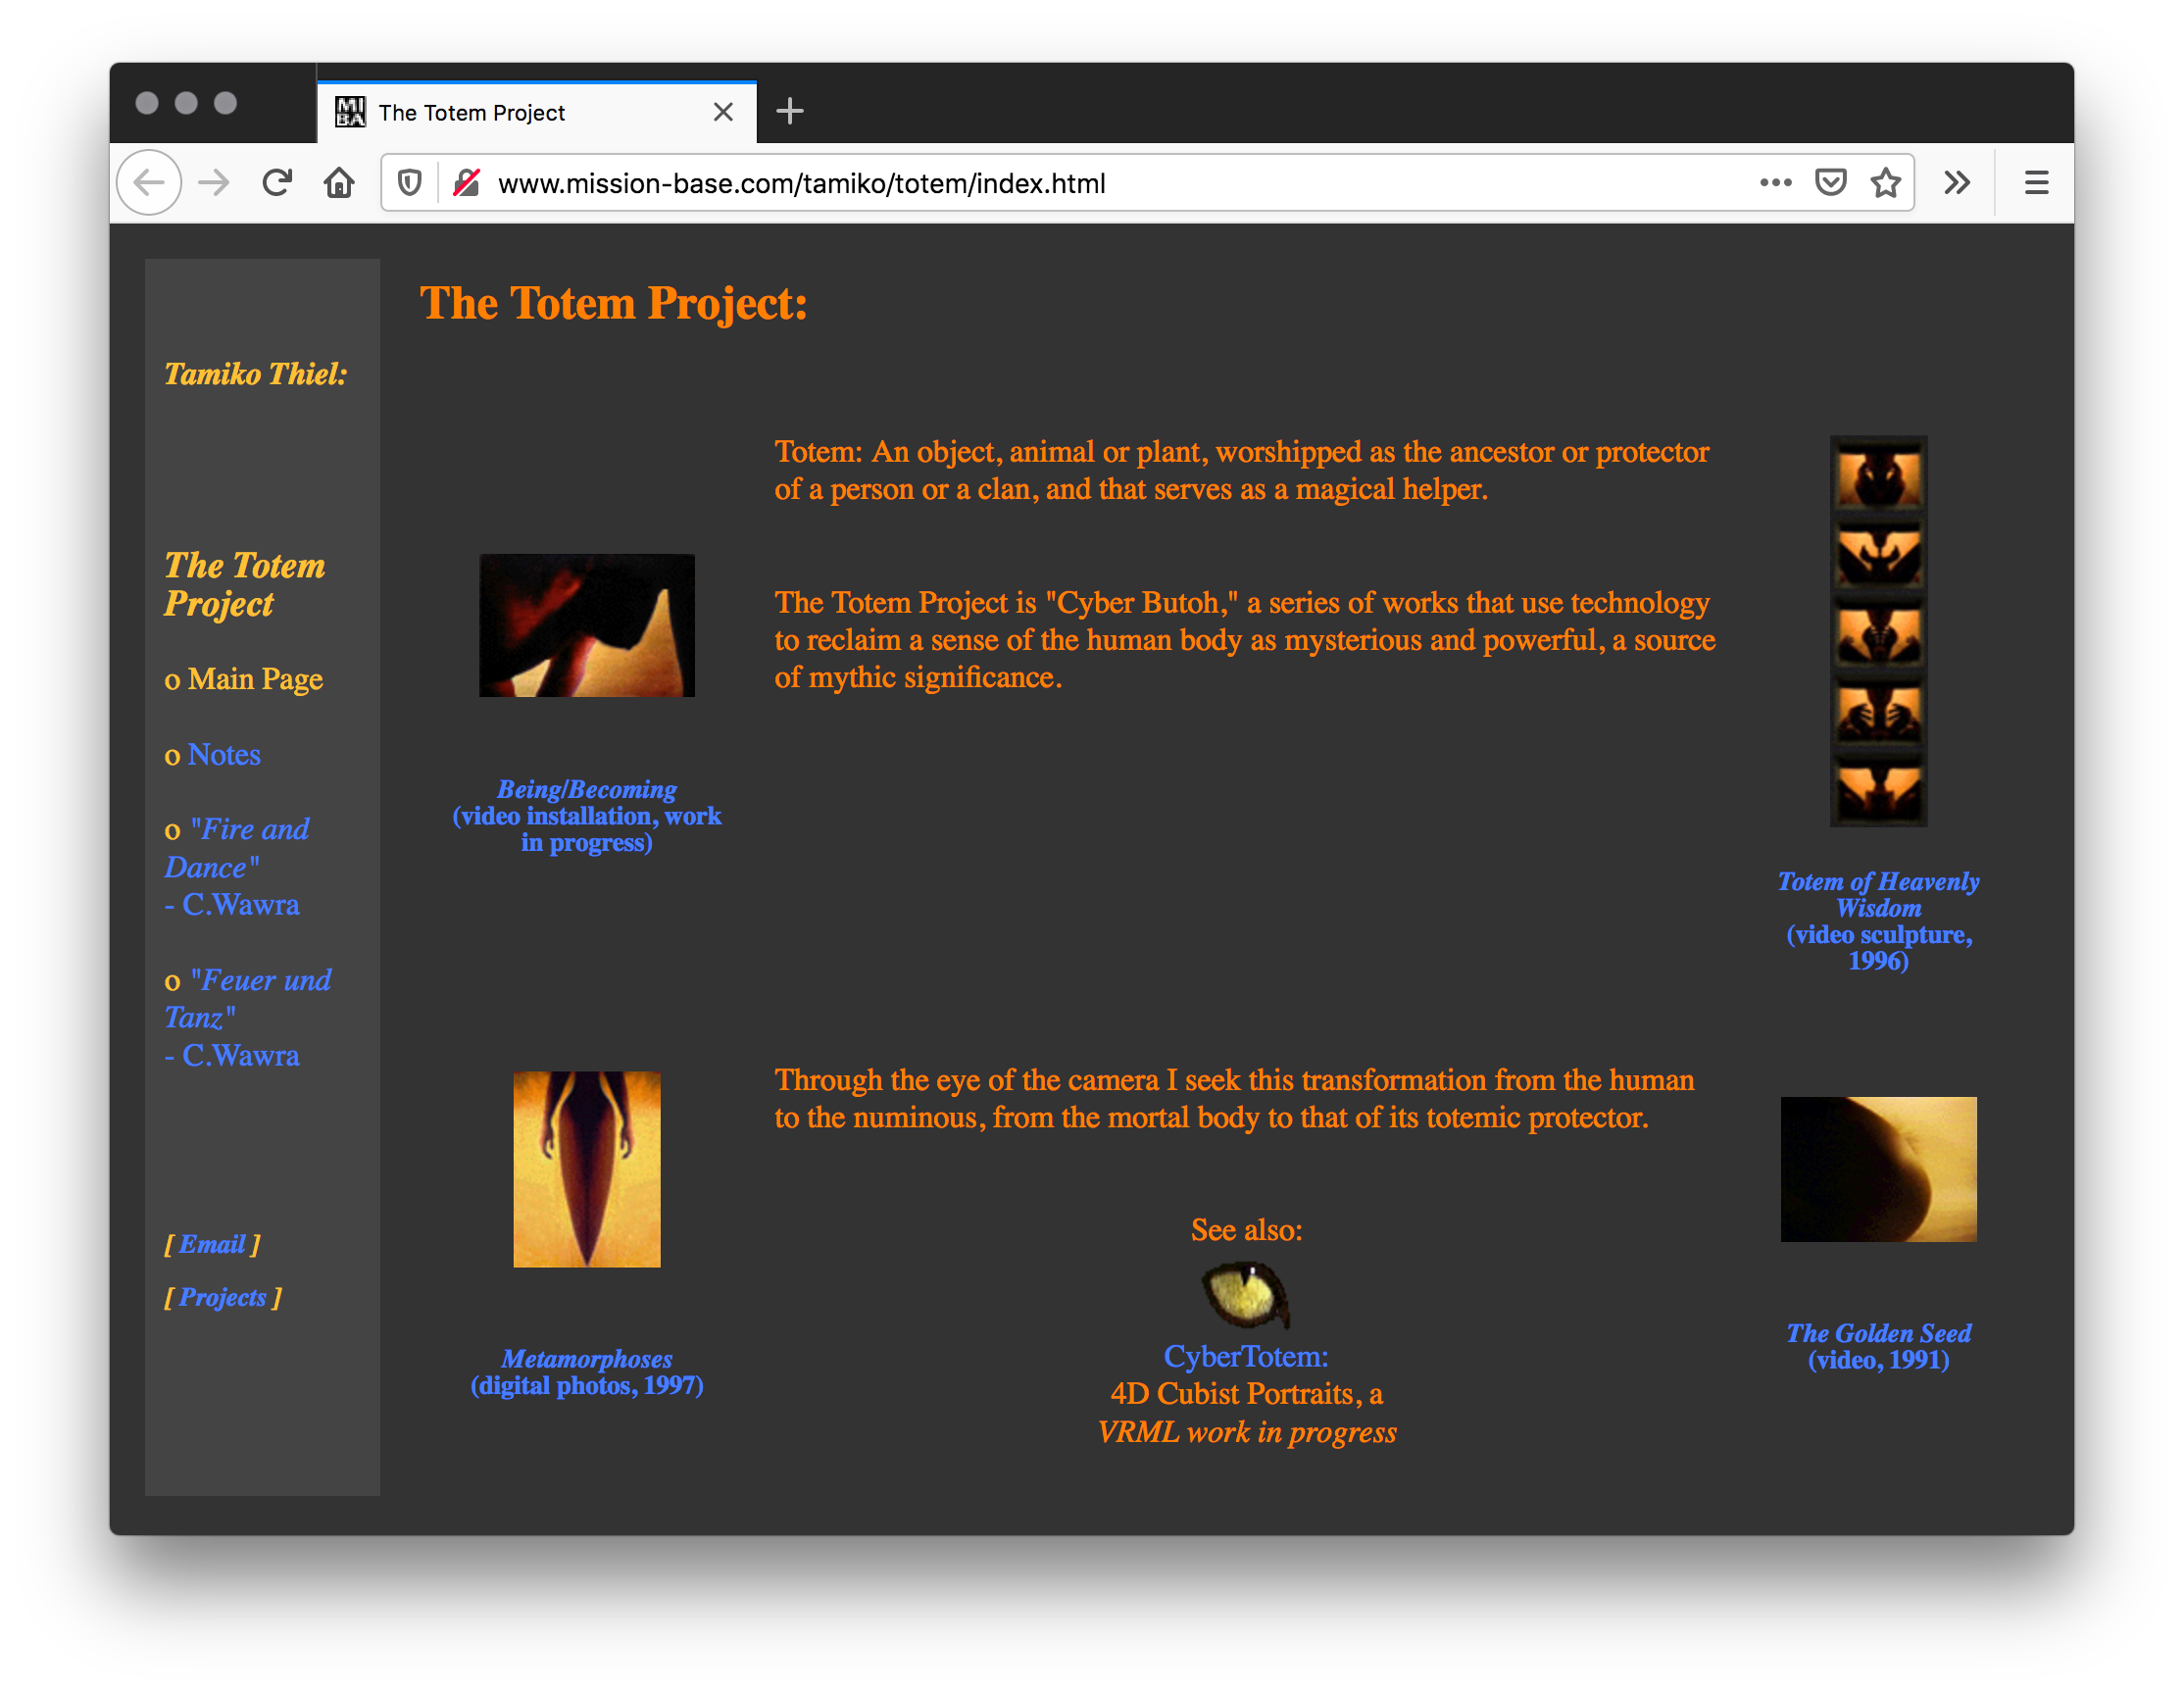 Screenshot of a grey webpage with orange text and four orange, yellow, and black images titled in blue text scattered throughout. A menu column of yellow and blue text flank the left.